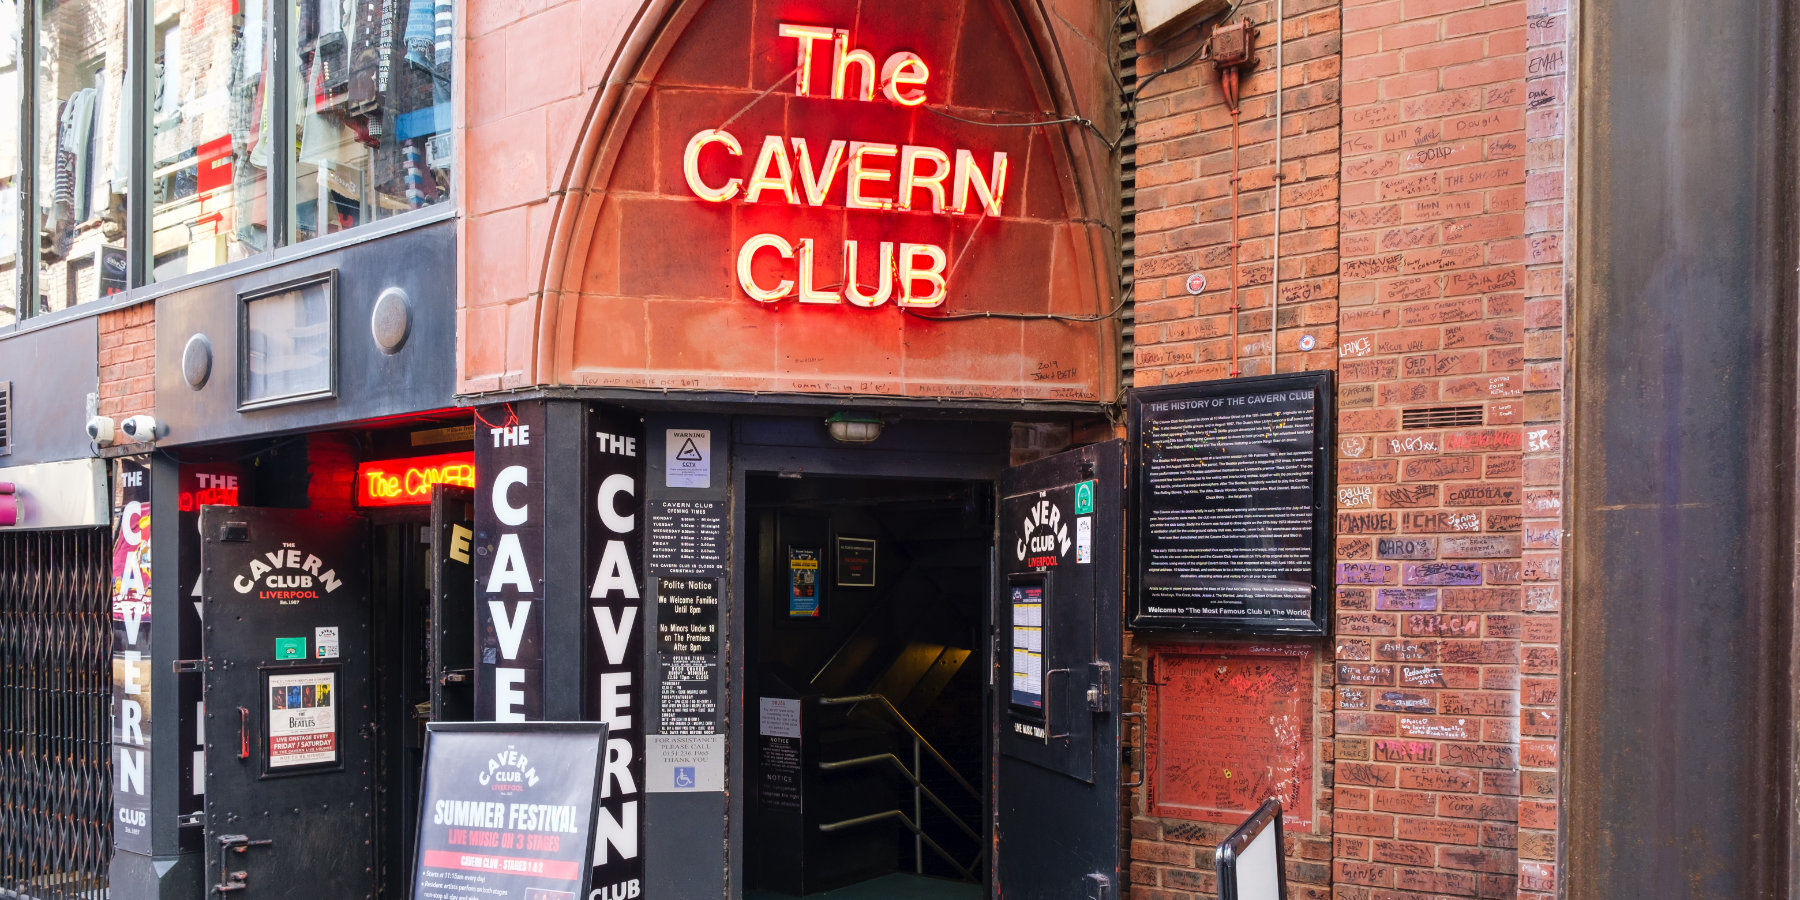 Carvern club in Liverpool